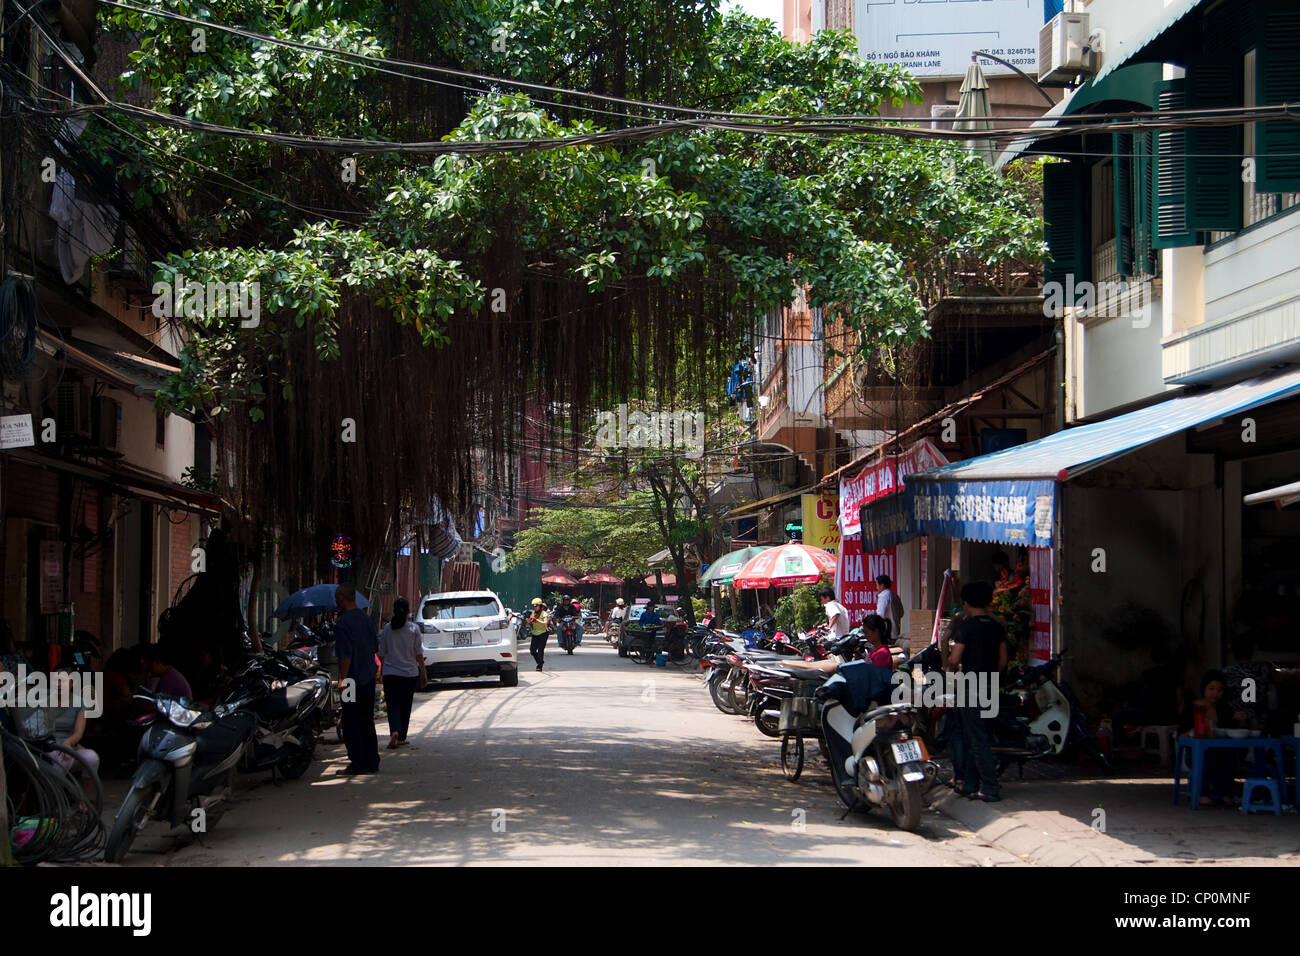 A typical tree canopy in the street in Hanoi, Vietnam Stock Photo